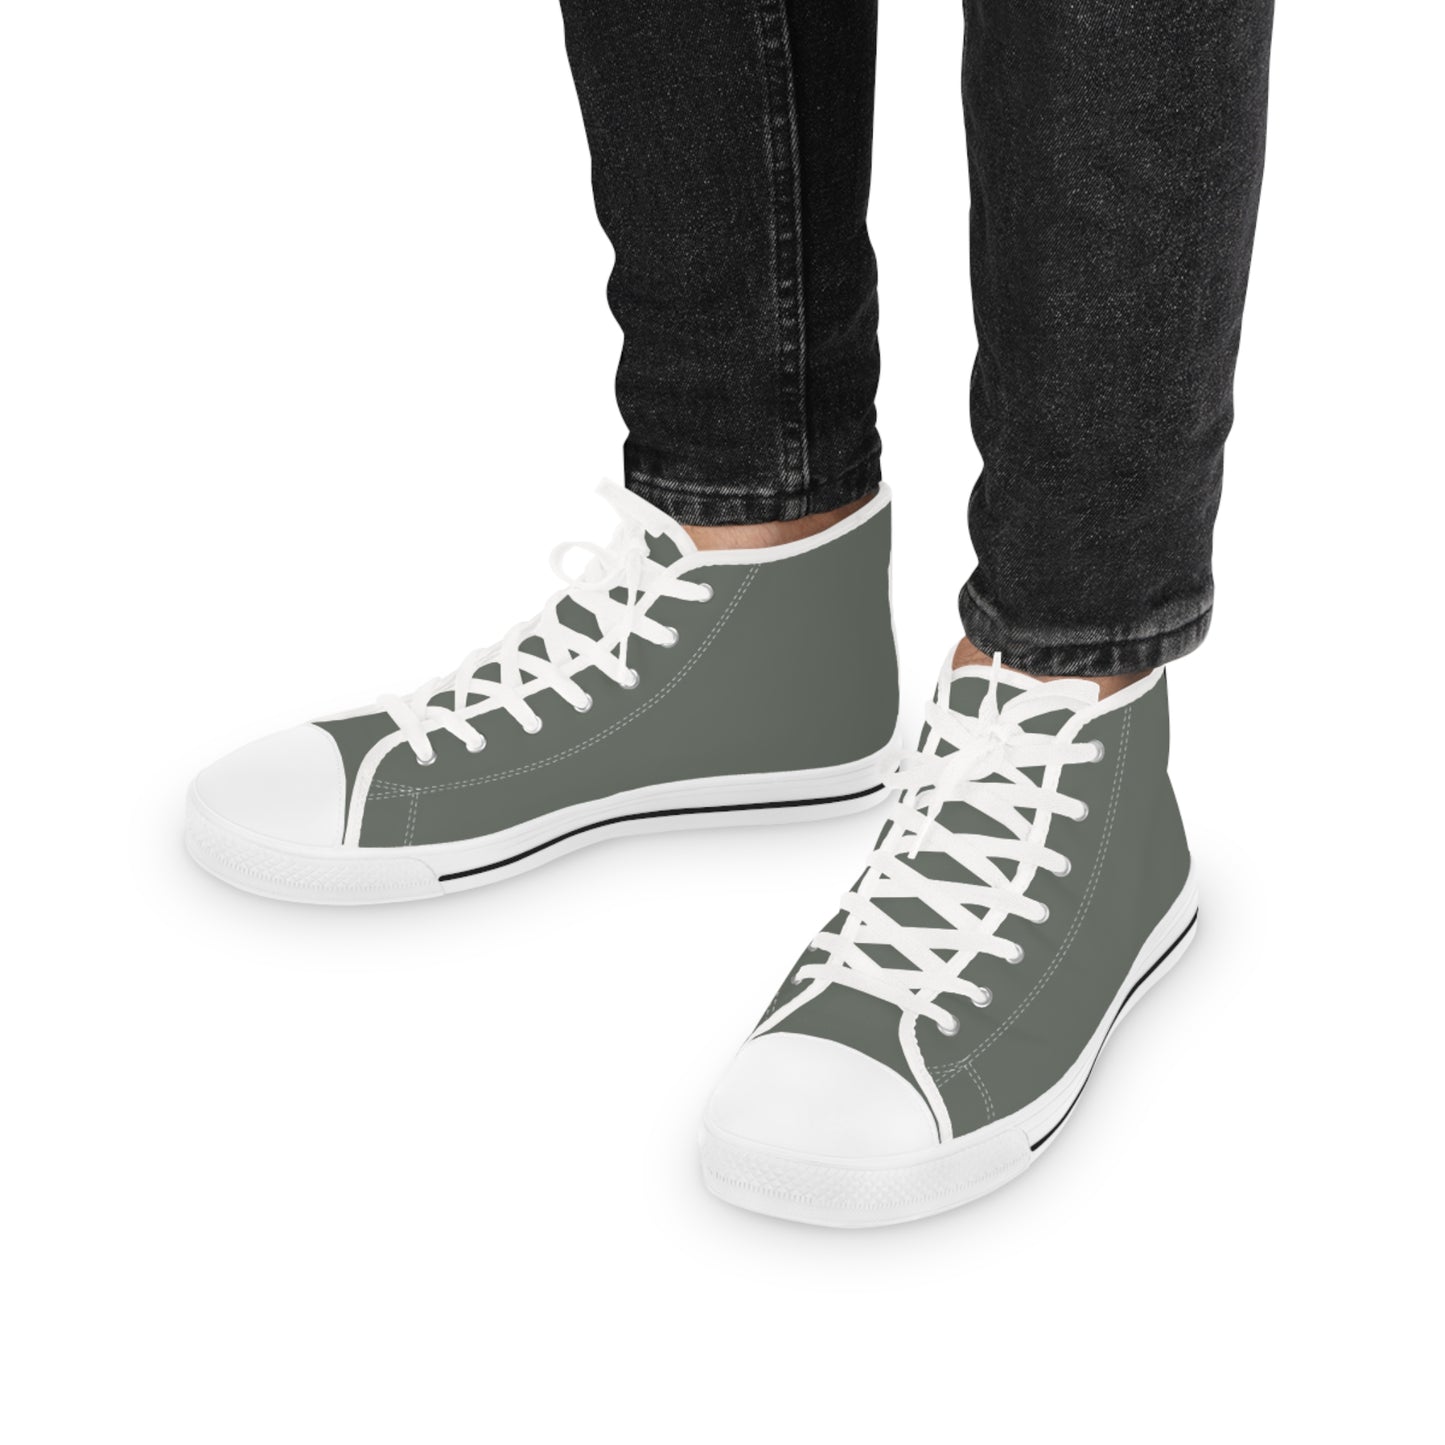 Men's Canvas High Top Solid Color Sneakers - Drab Olive Gray US 14 White sole